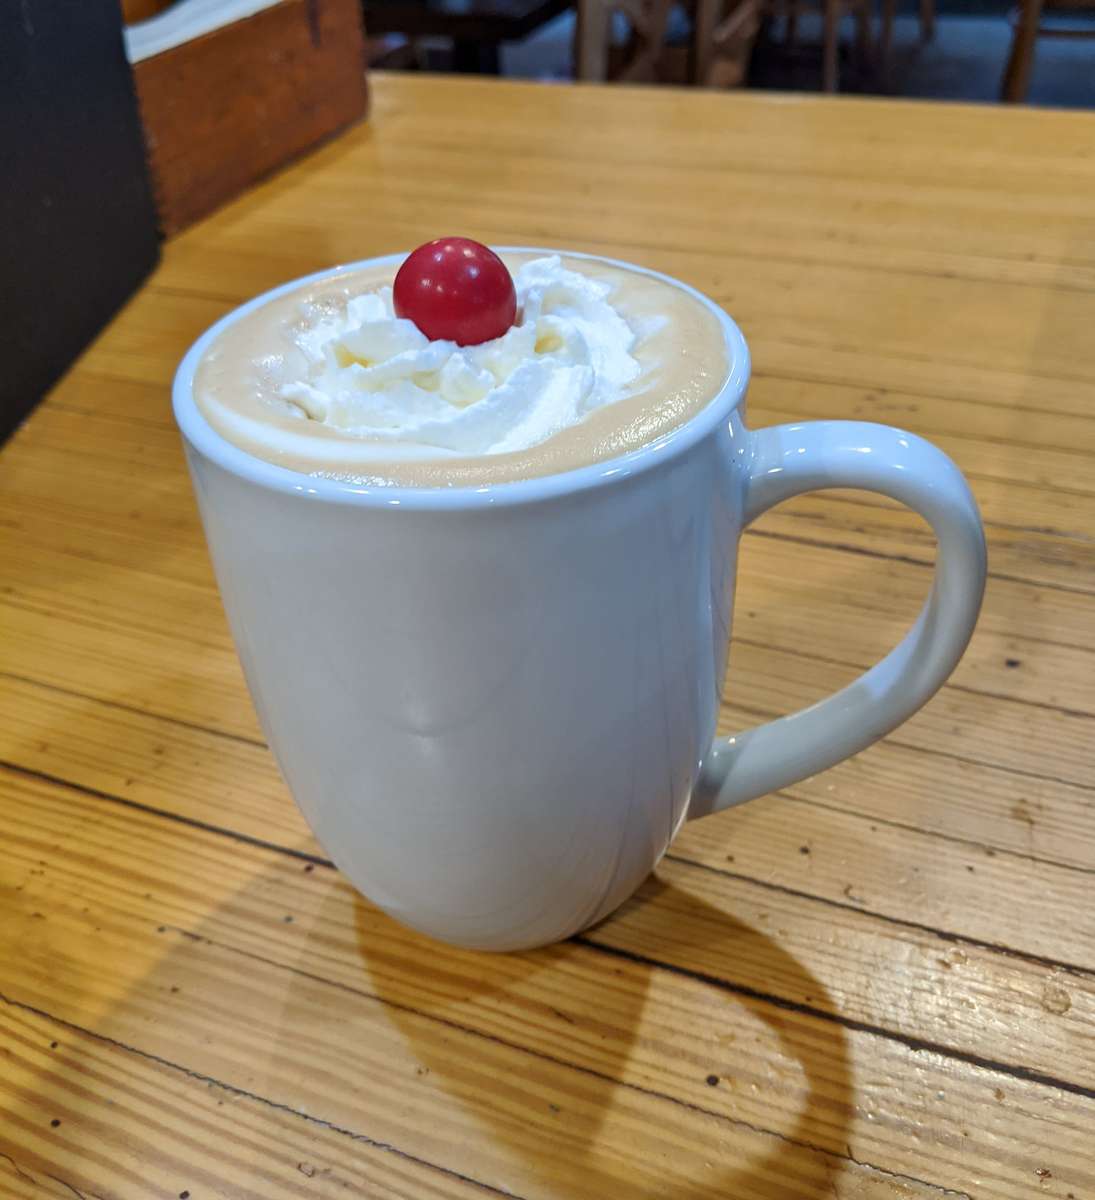 Rudolph's Red Nose Latte